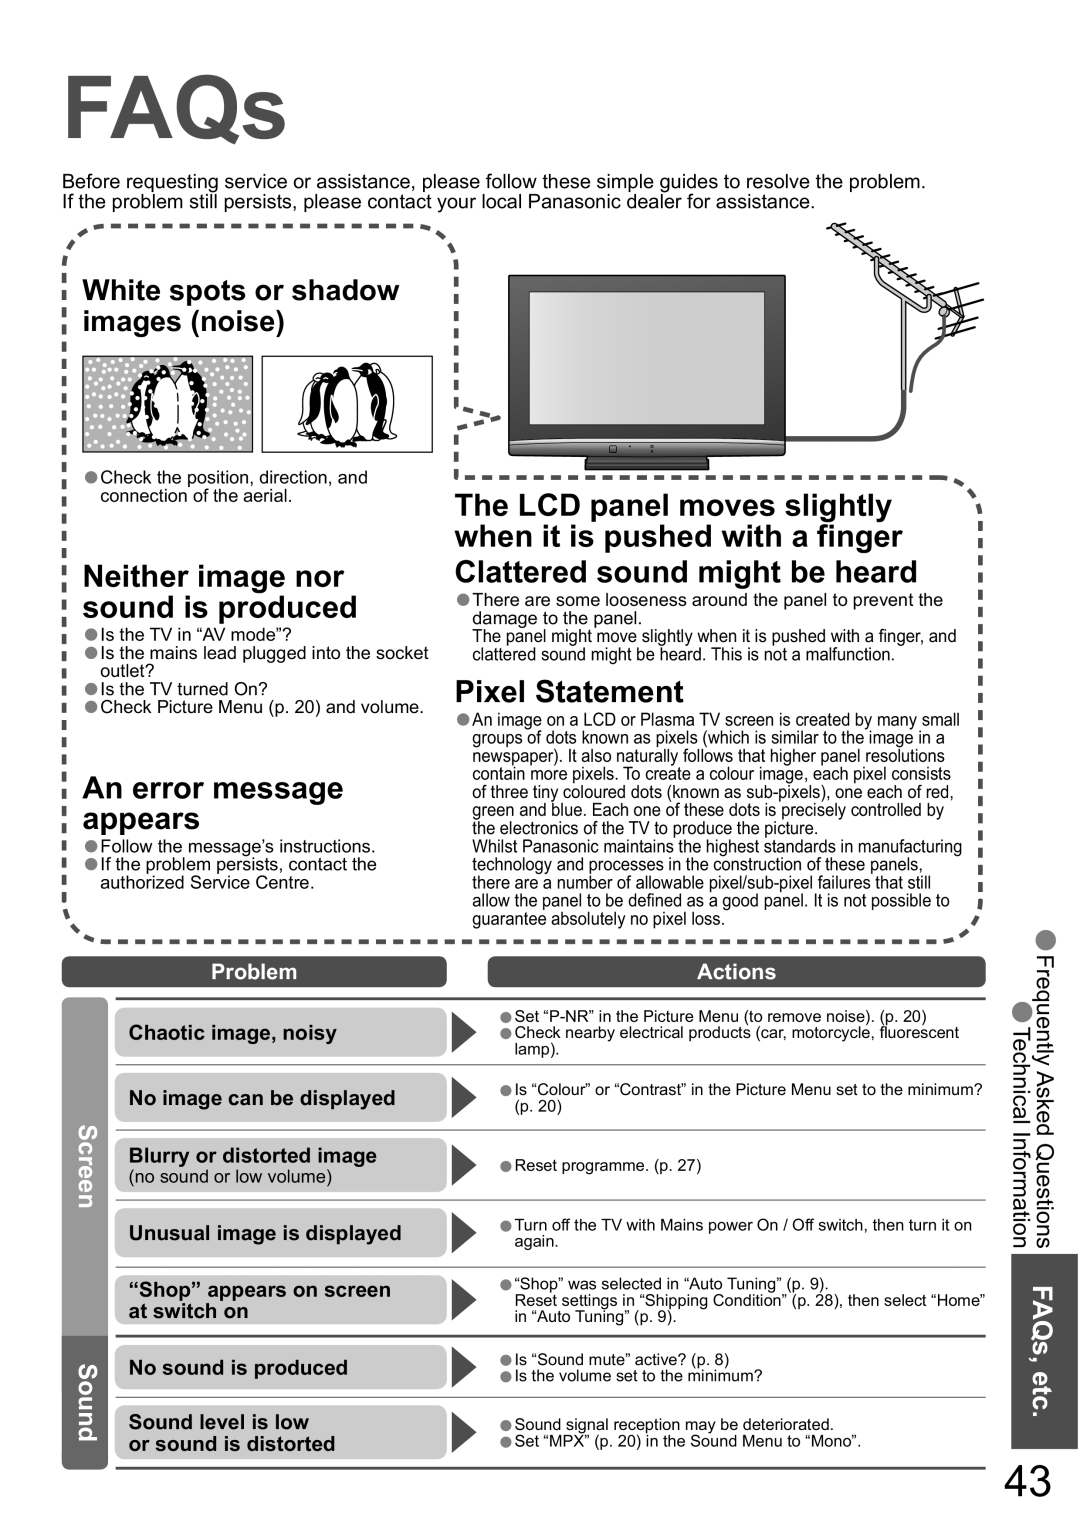 Panasonic TX-32LXD8A manual FAQs, White spots or shadow images noise, Sound, Problem, Actions, An error message appears 